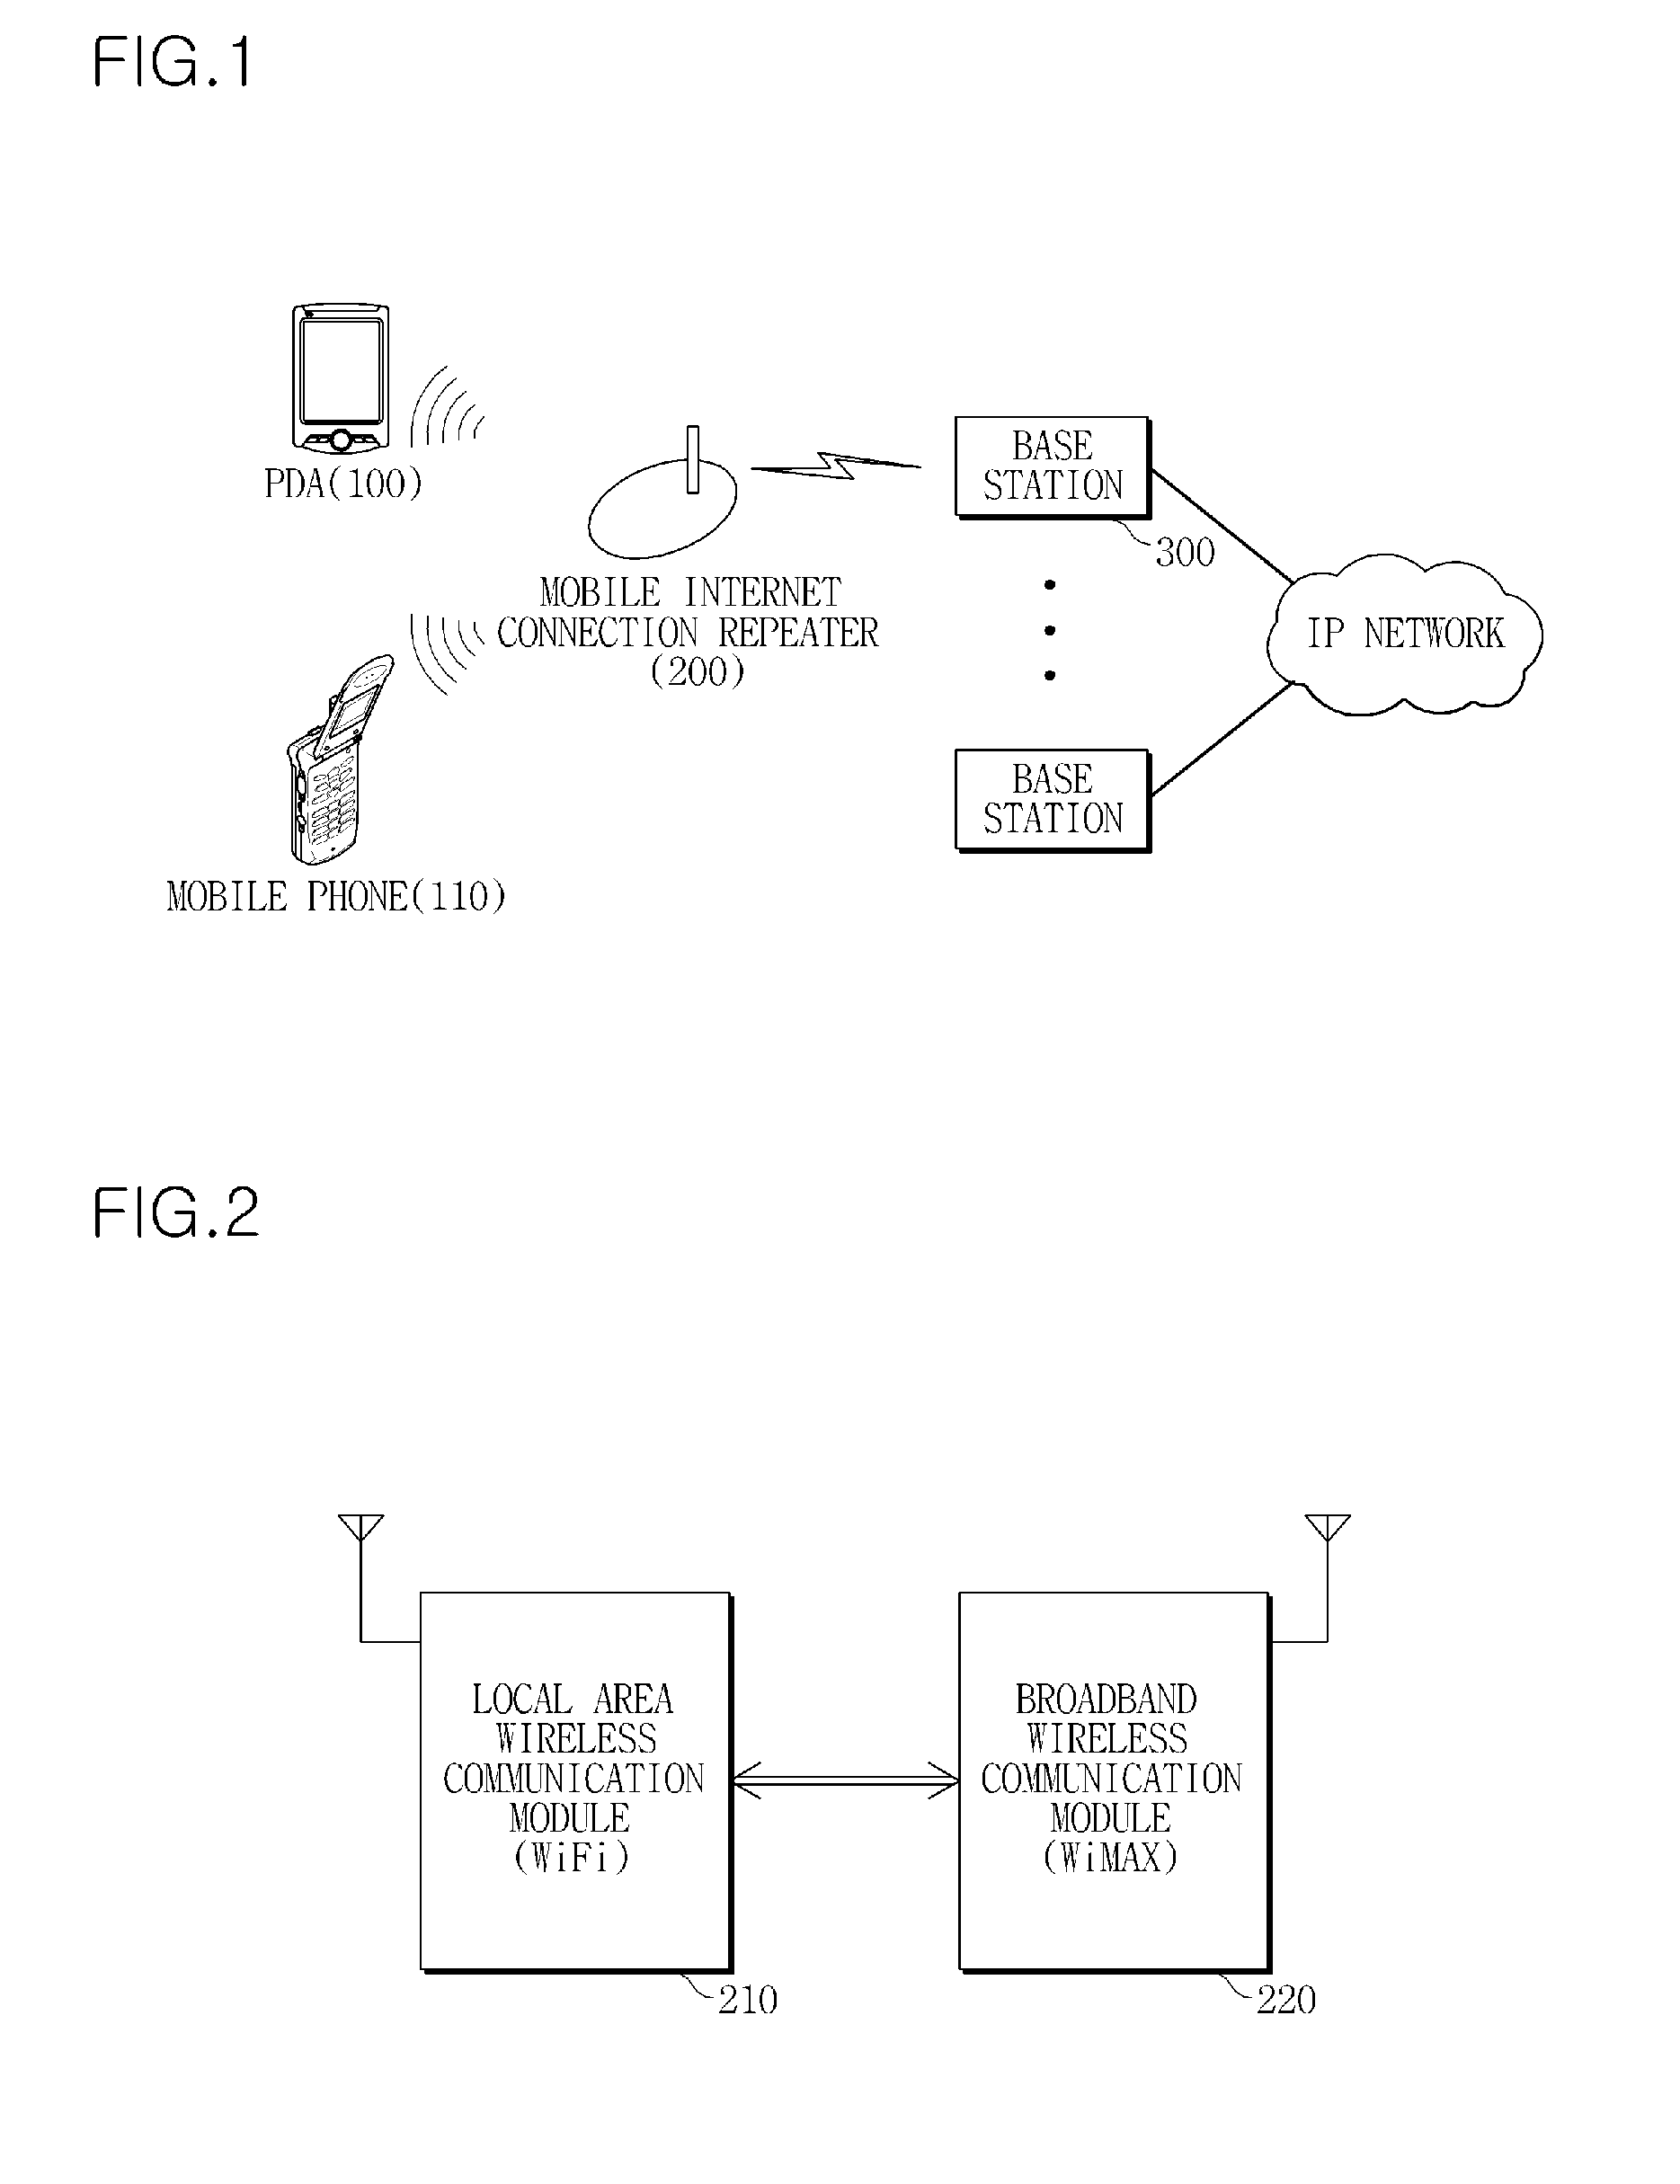 Wireless internet connection repeater without signal interference